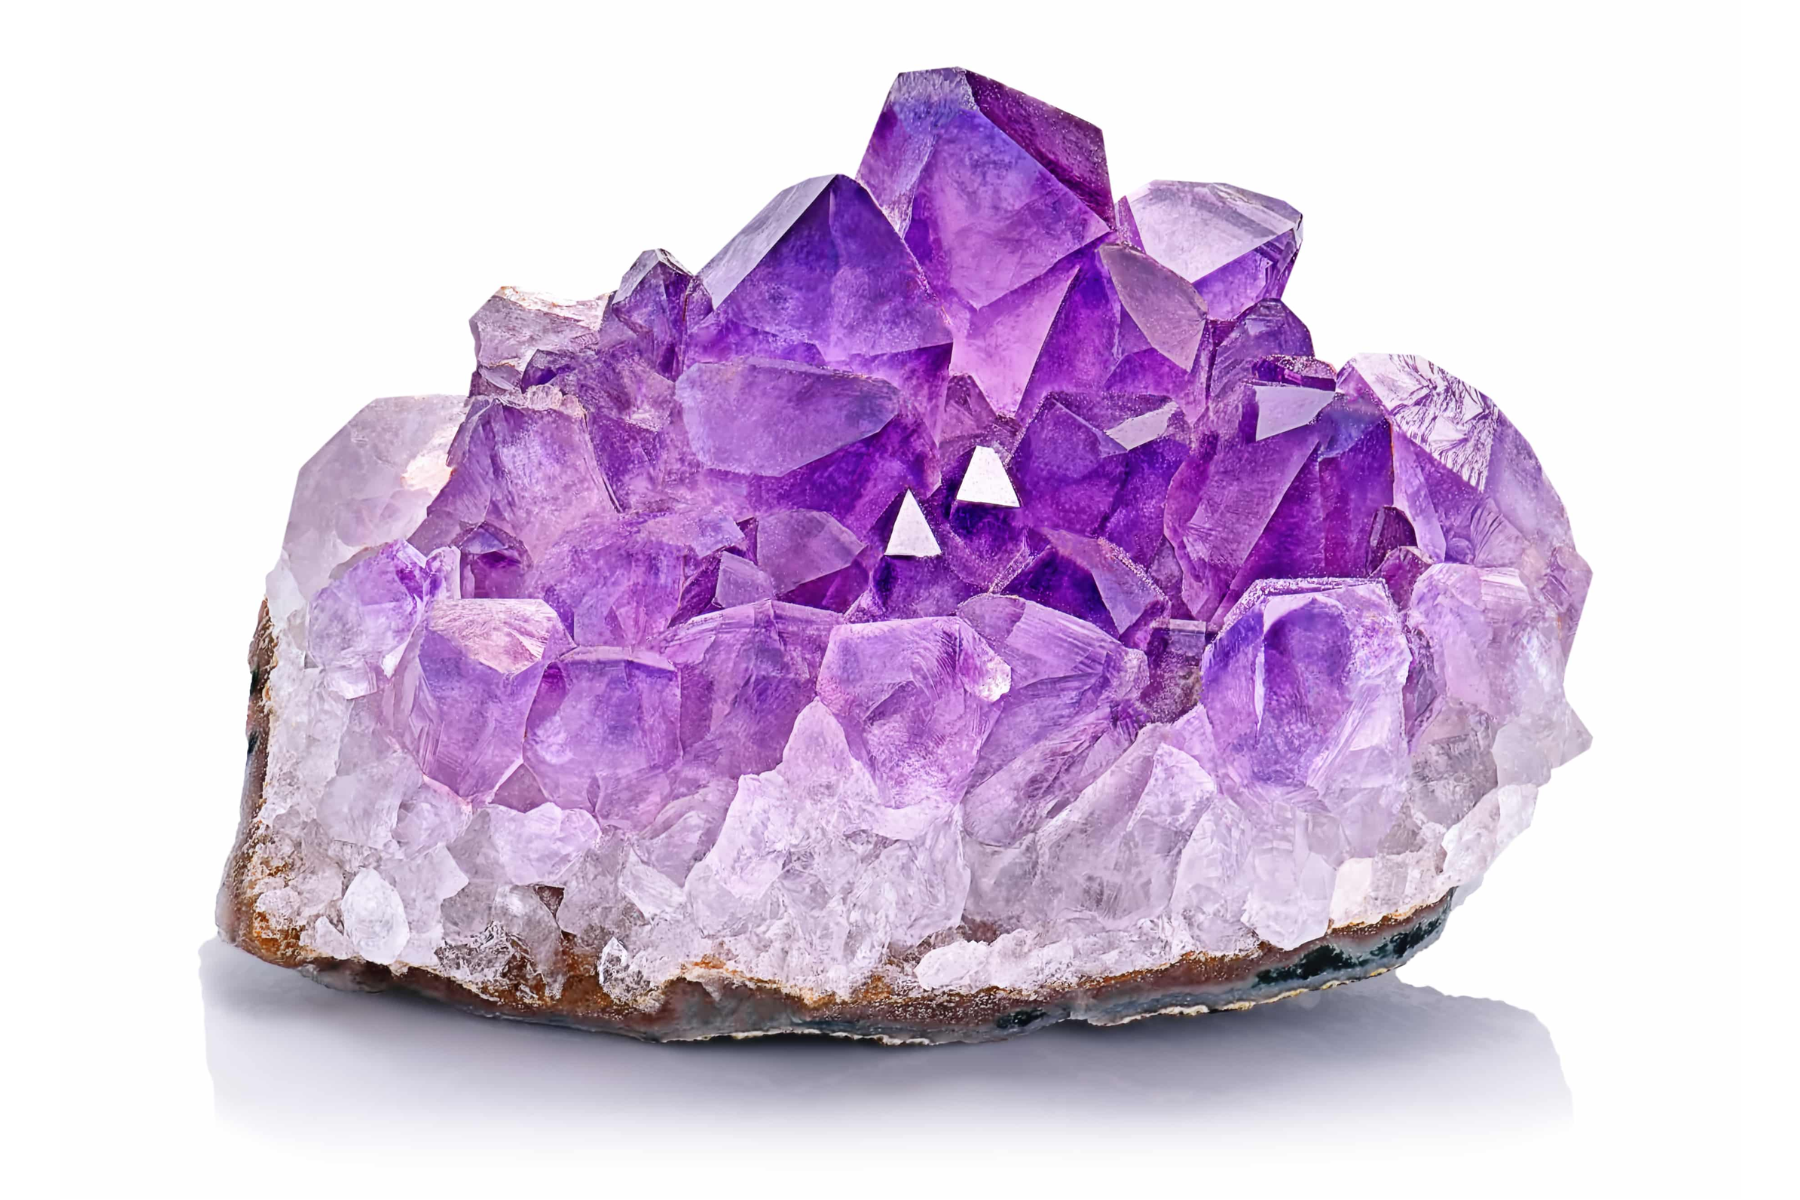 Amethyst that is still attached to its host rock